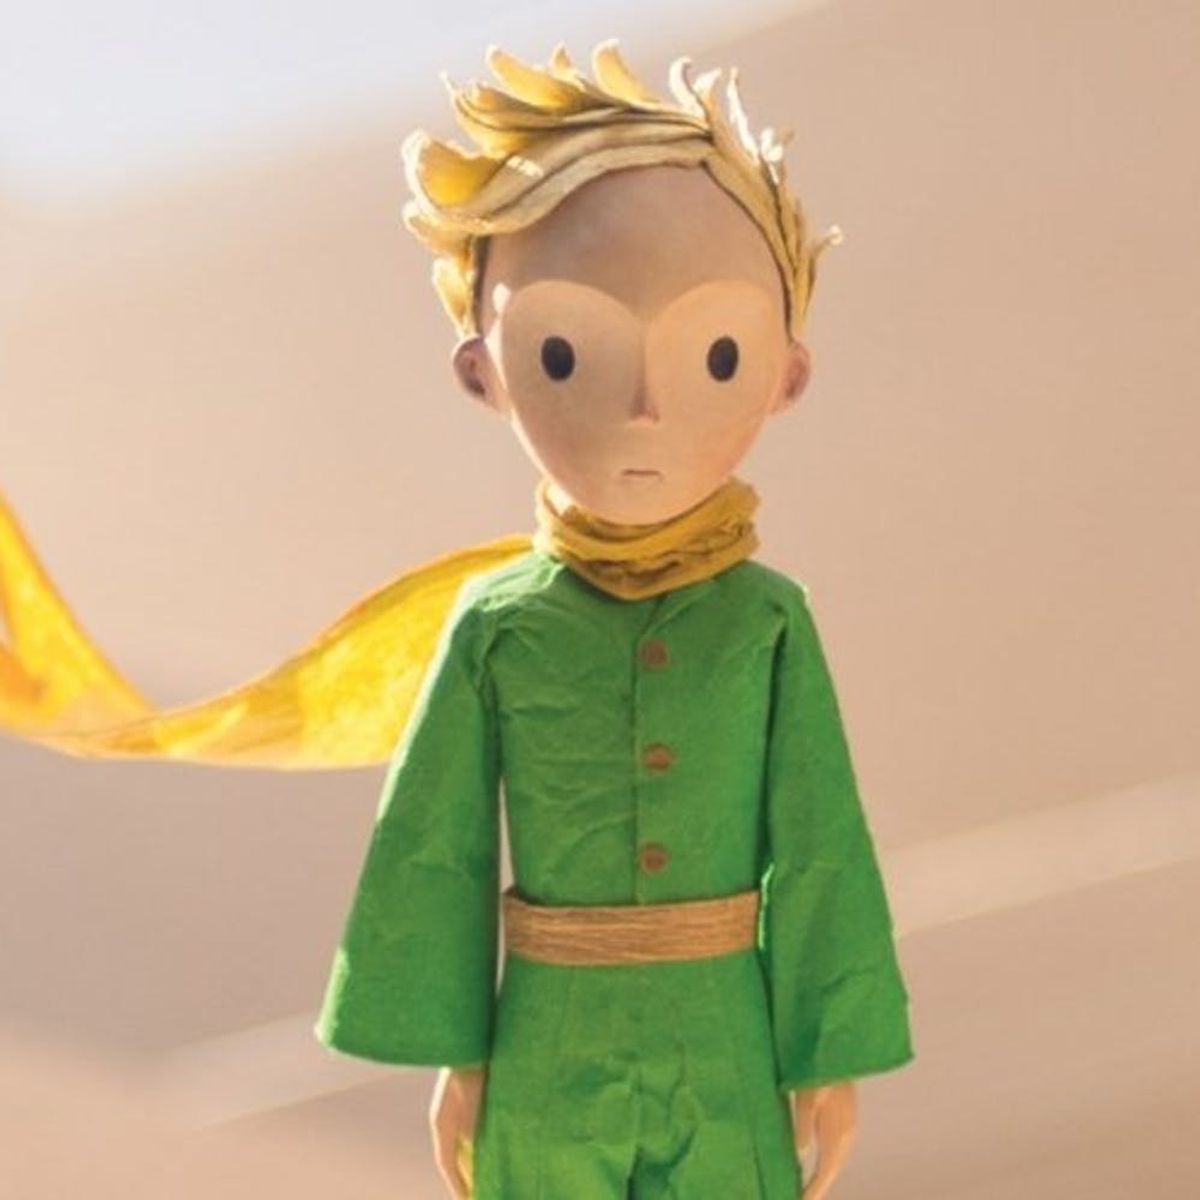 The Little Prince Trailer Will Remind You of Childhood Wonders